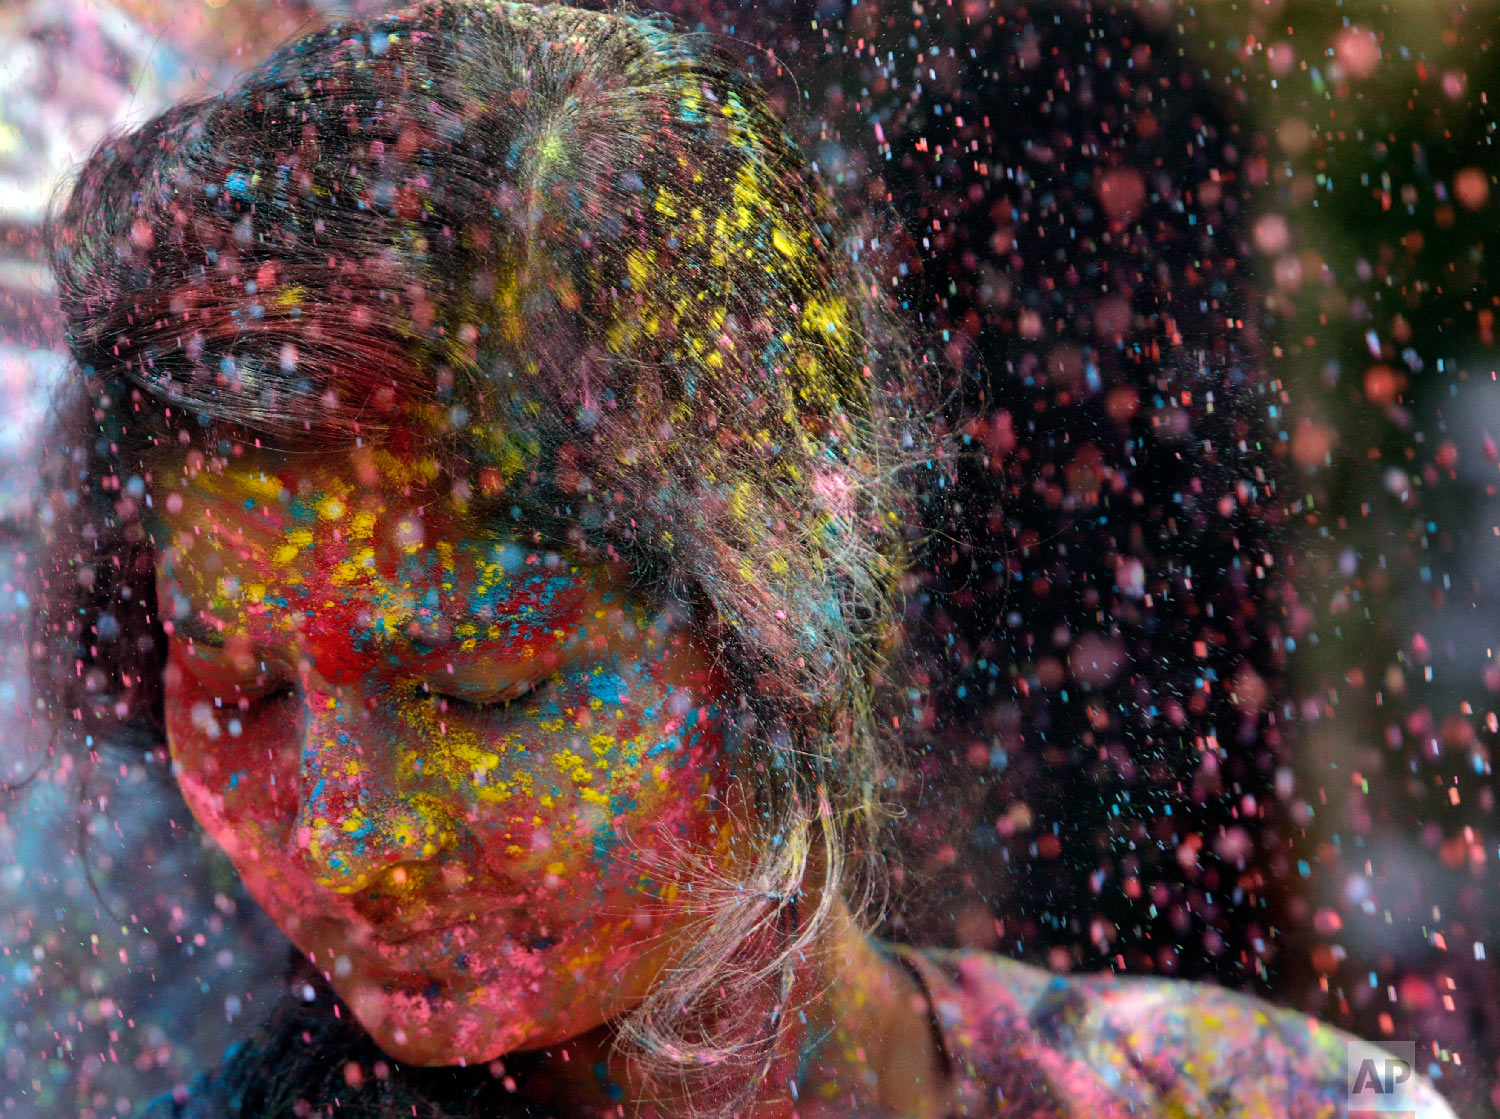 Hindus Celebrate Holi The Festival Of Colors Across India — Ap Images